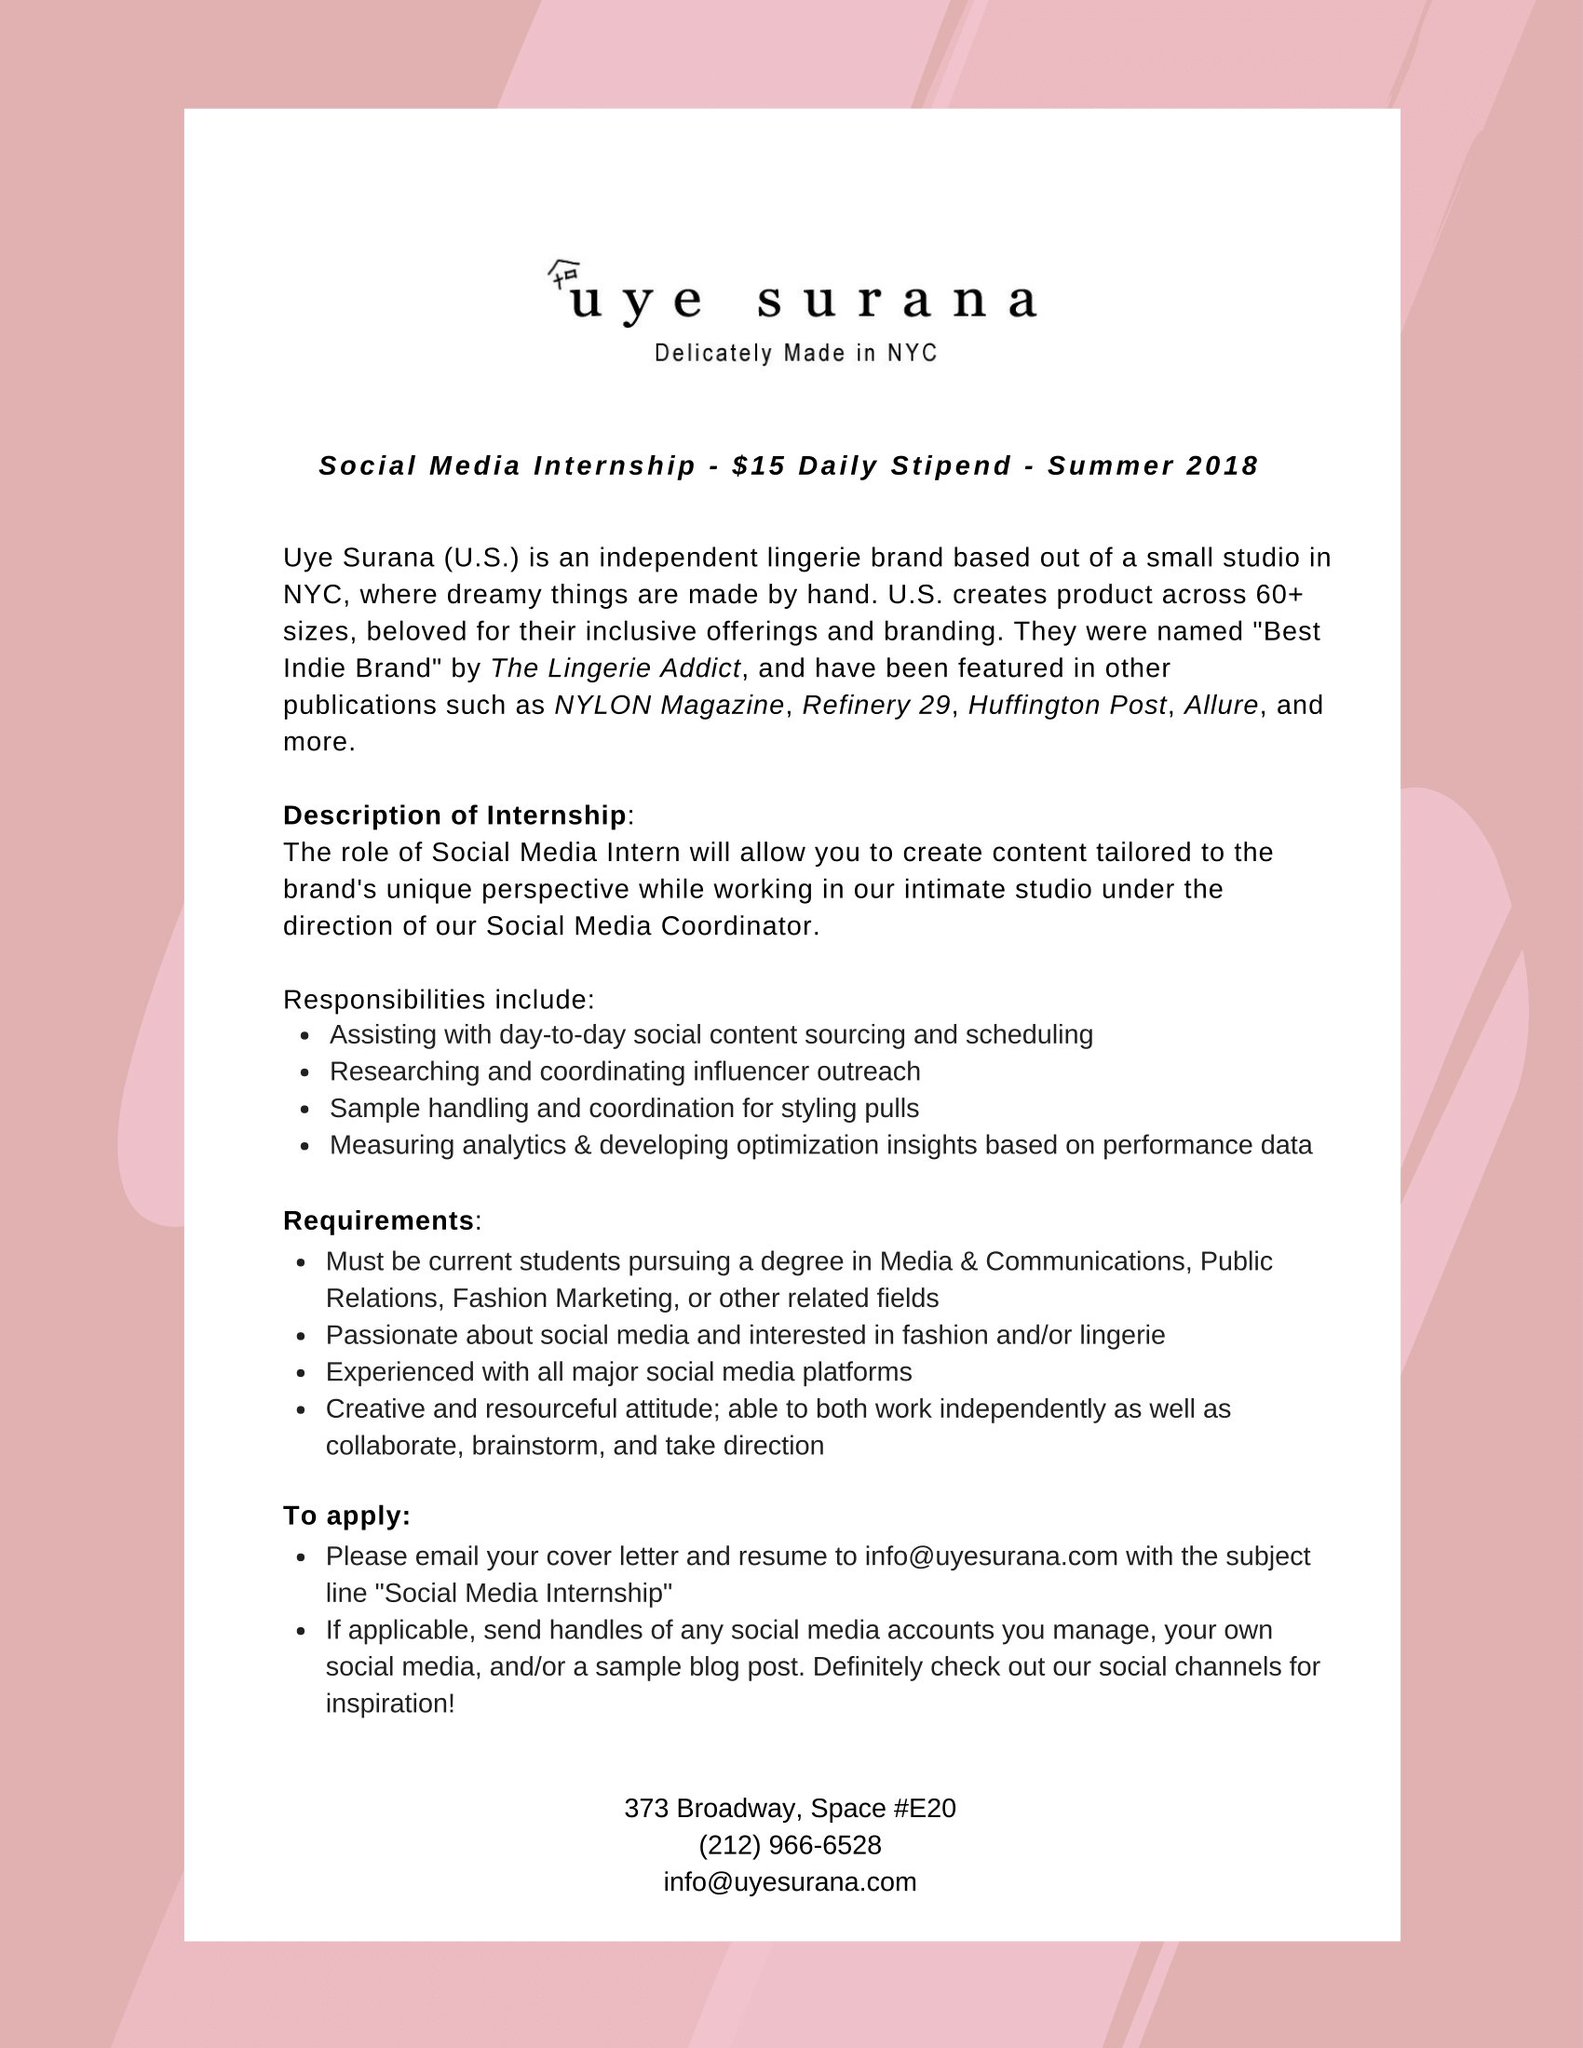 Rit School Of Communication On Twitter Interested In An Internship Opportunity In Nyc This Summer Indie Fashion Brand Uye Surana Is Looking For A Social Media Intern To Apply Email Your Cover